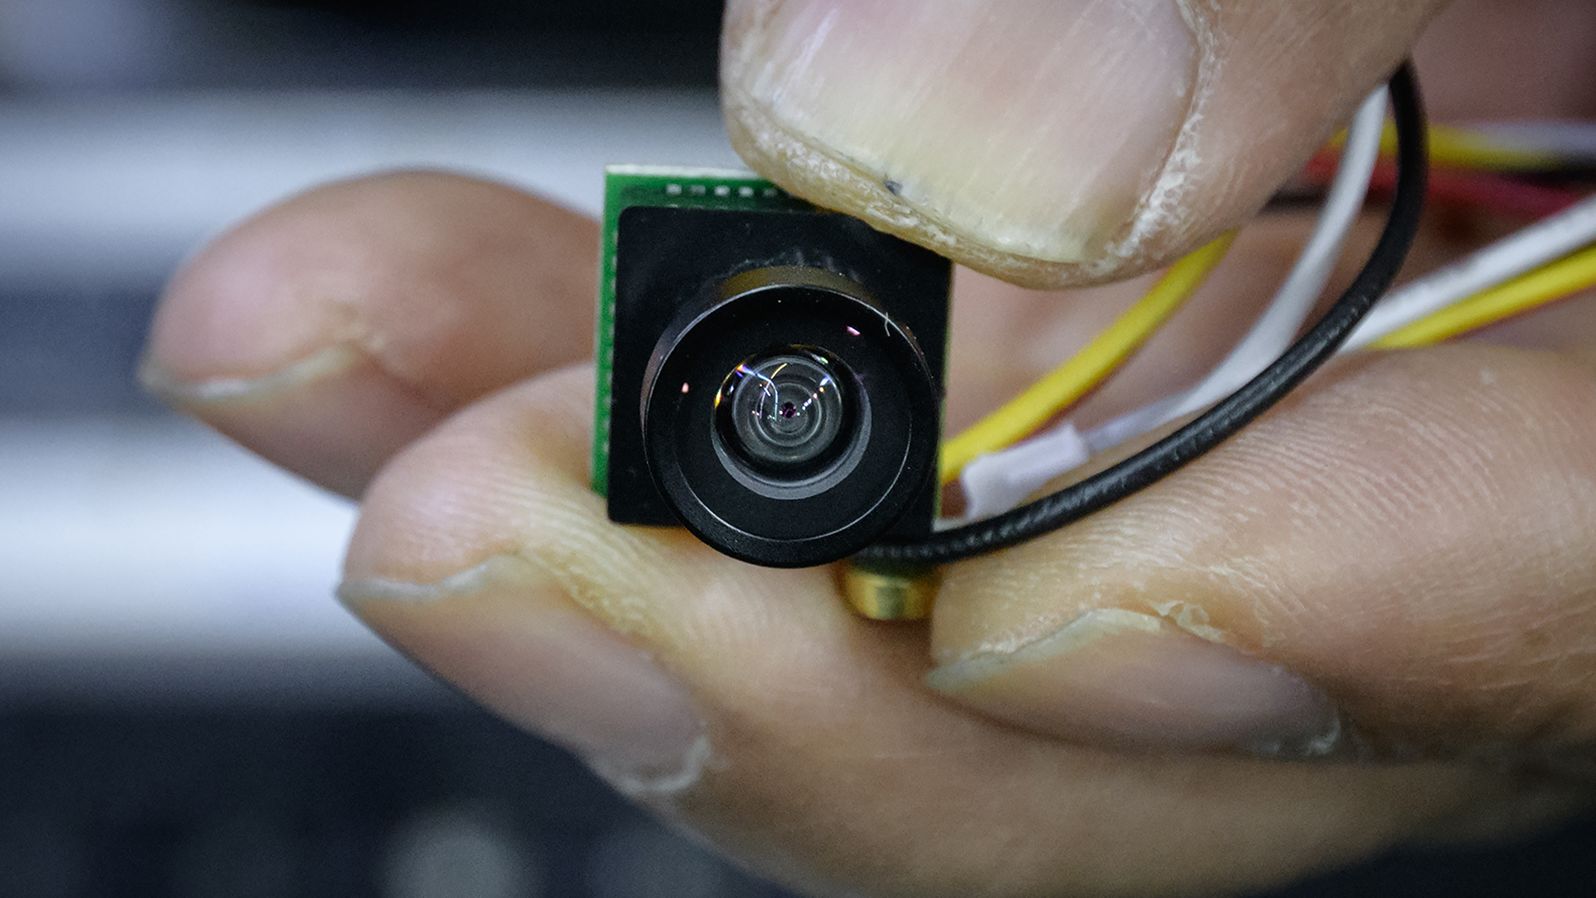 A miniature camera unit like the ones used in spycams in a store in Seoul, South Korea, on March 26.